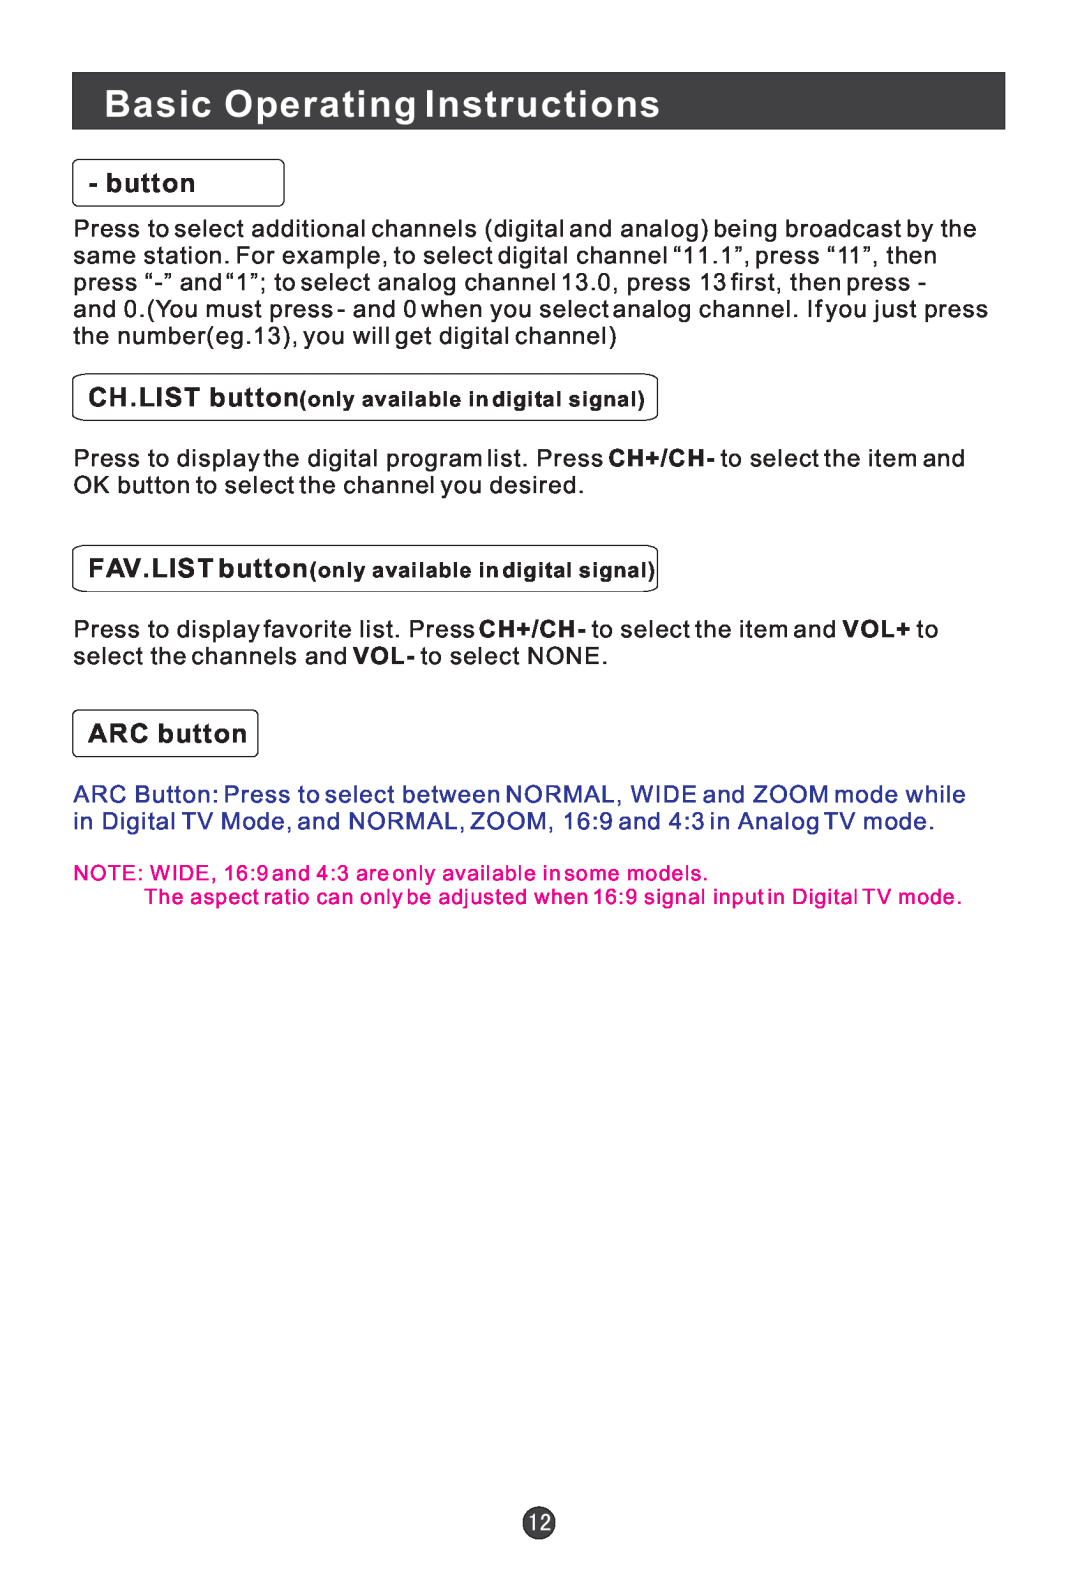 Haier HL15B user manual Basic Operating Instructions, ARC button, CH.LIST buttononly available in digital signal 